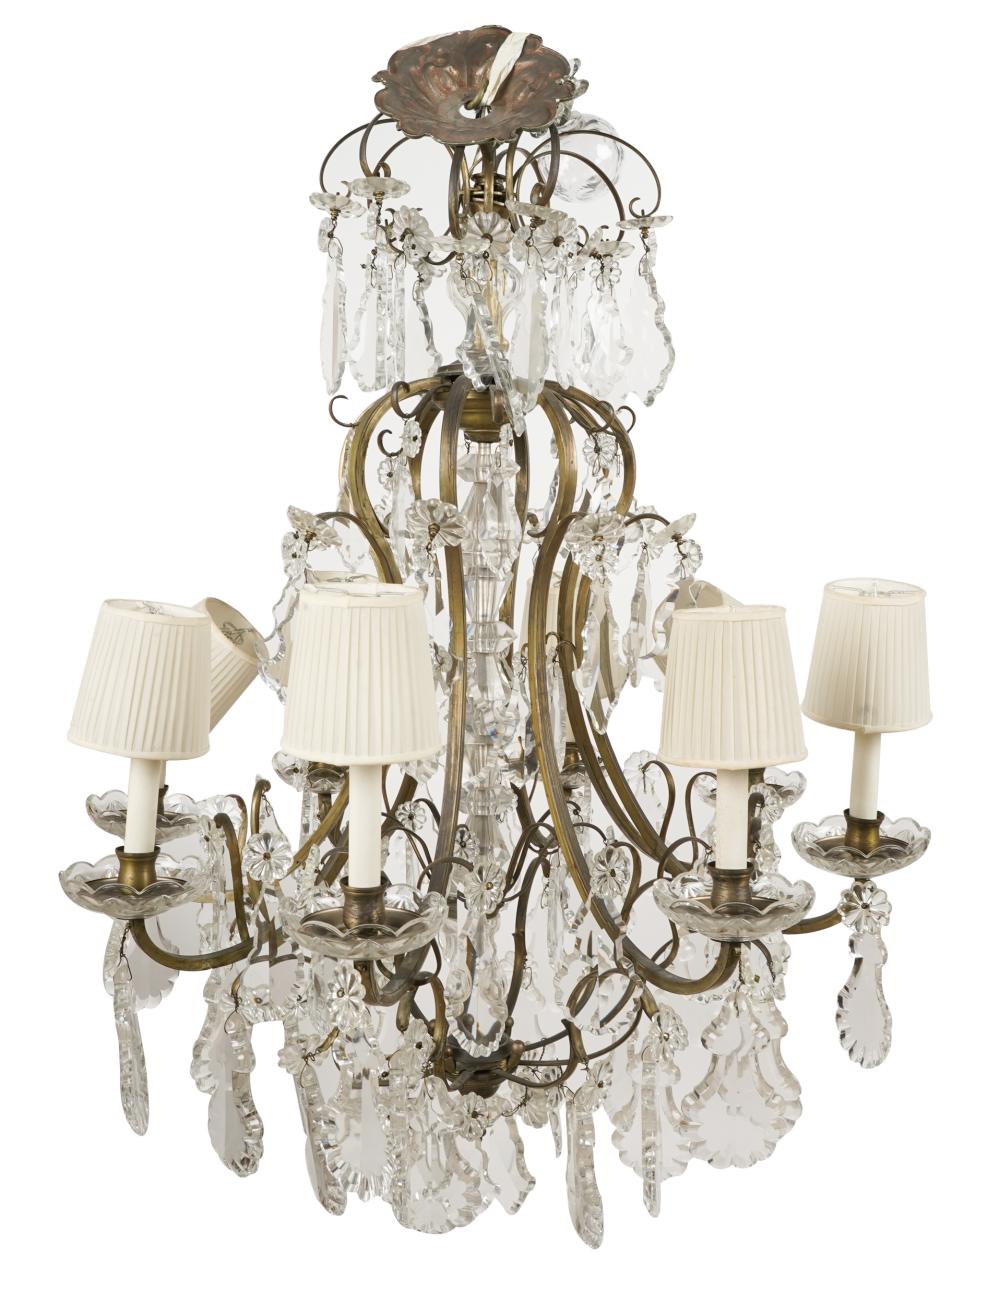 EIGHT-LIGHT CRYSTAL CHANDELIERwith